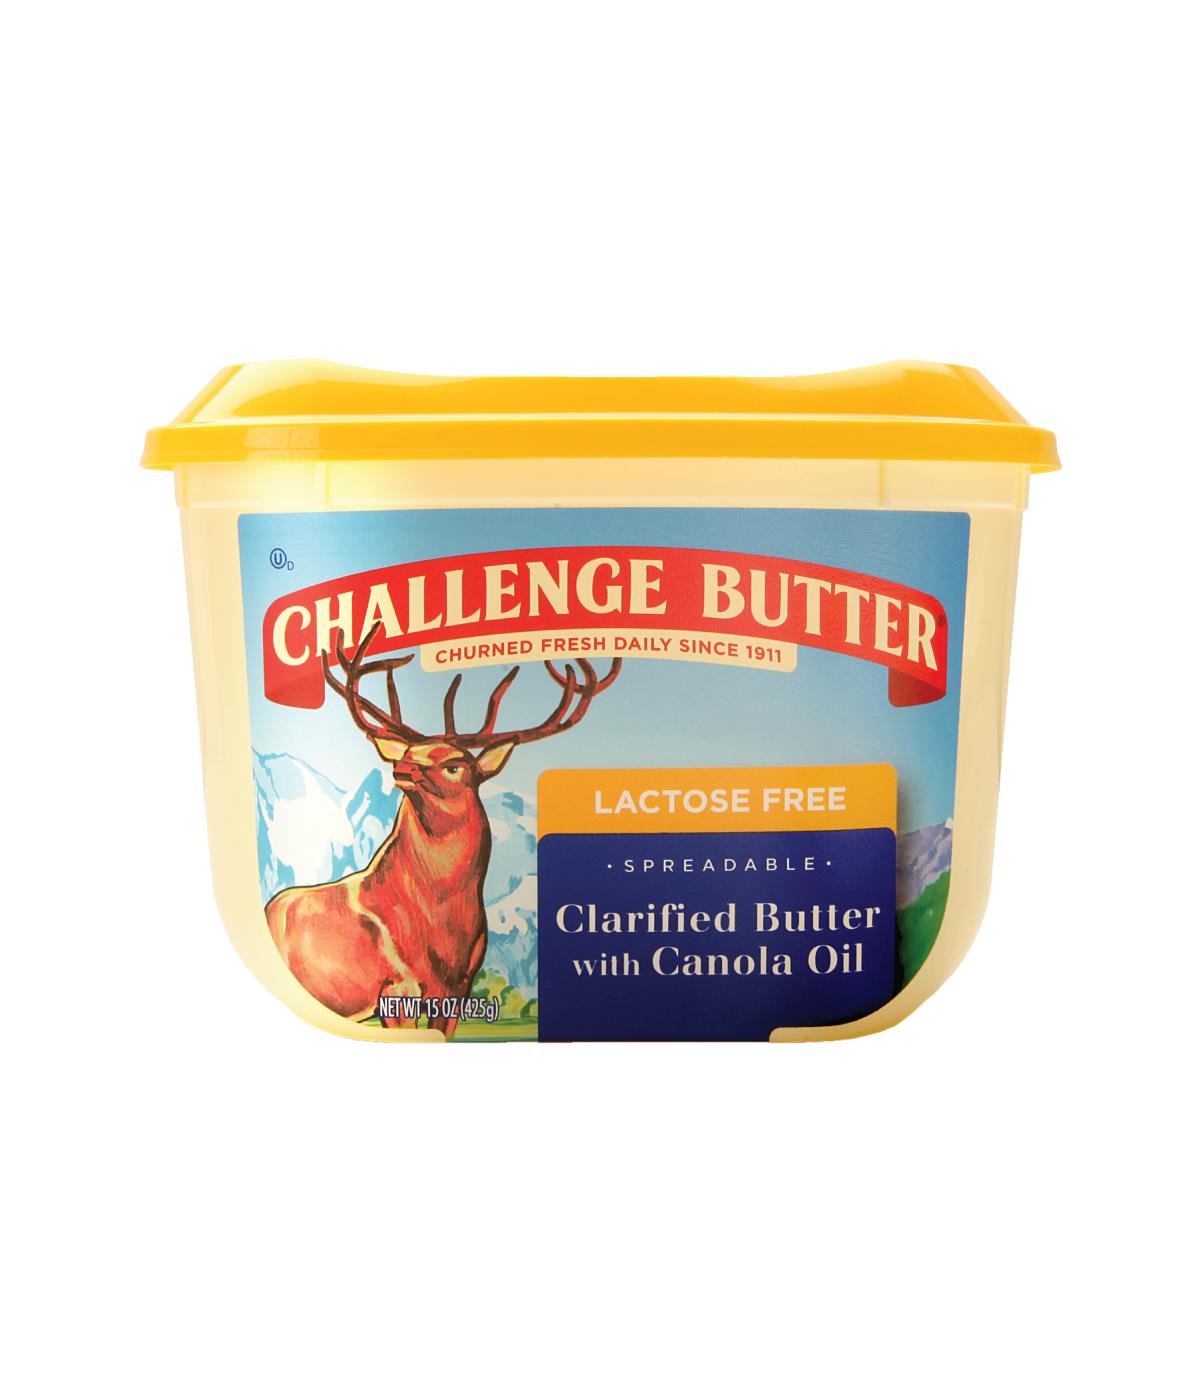 Challenge Butter Lactose Free with Canola Oil; image 1 of 4